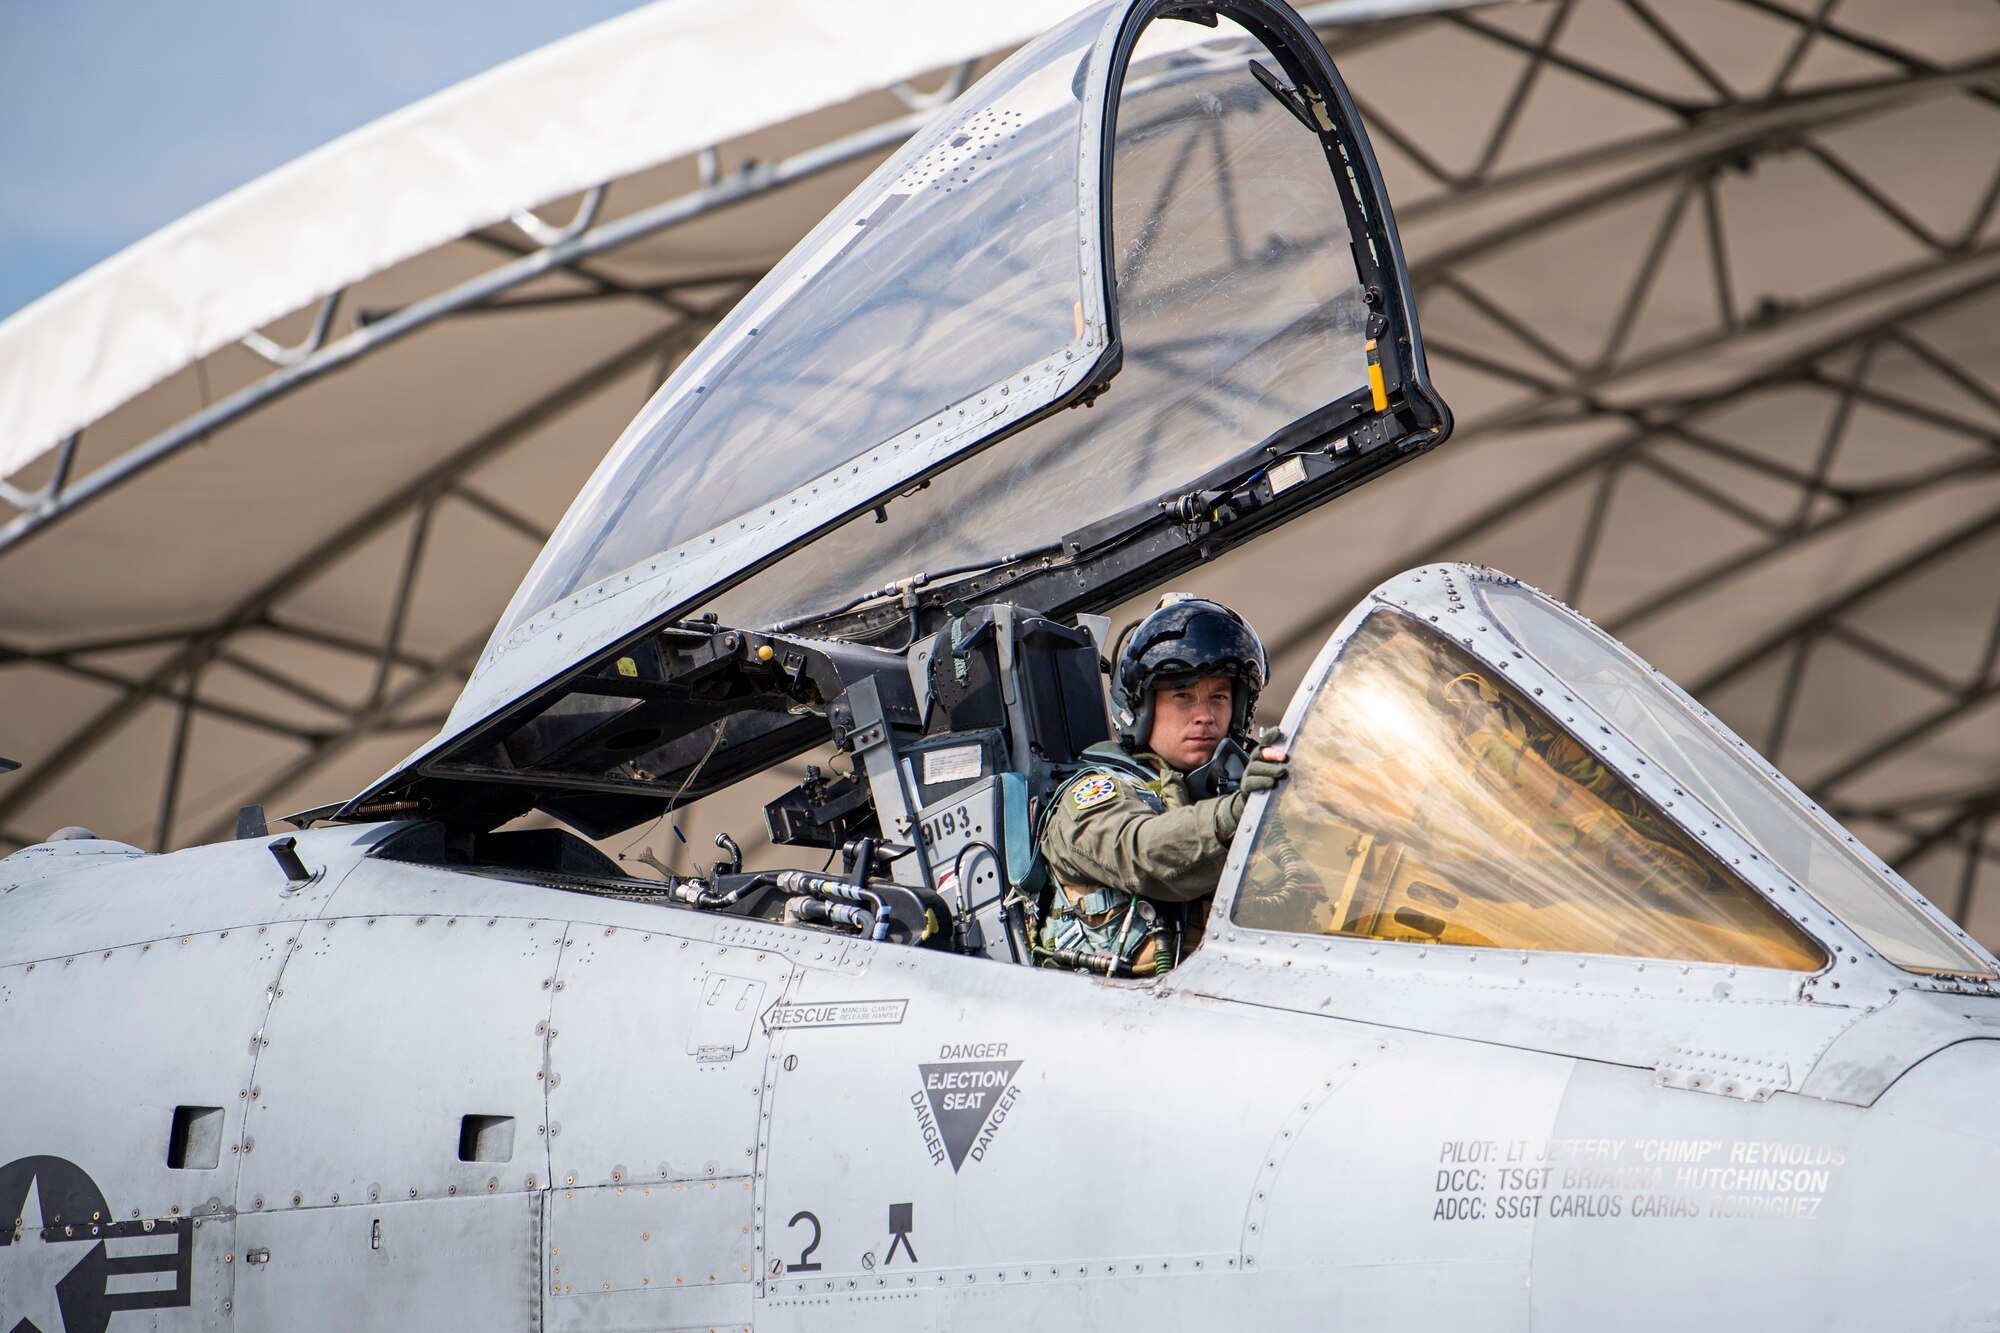 U.S. Air Force Maj. Tyler Ribar, 74th Fighter Squadron A-10C Thunderbolt II pilot prepares for take-off during Exercise Ready Tiger 24-1 at Moody Air Force Base, Georgia, April 9, 2024. The 23rd Fighter Group directs the flying and maintenance operations for the U.S. Air Force’s largest A-10C fighter group, consisting of two combat-ready A-10C squadrons and an operations support squadron. The group ensures overall combat training and readiness for over 90 pilots and 180 support personnel. Built upon Air Combat Command's directive to assert air power in contested environments, Exercise Ready Tiger 24-1 aims to test and enhance the 23rd Wing’s proficiency in executing Lead Wing and Expeditionary Air Base concepts through Agile Combat Employment and command and control operations. (U.S. Air Force photo by 2nd Lt. Benjamin Williams)